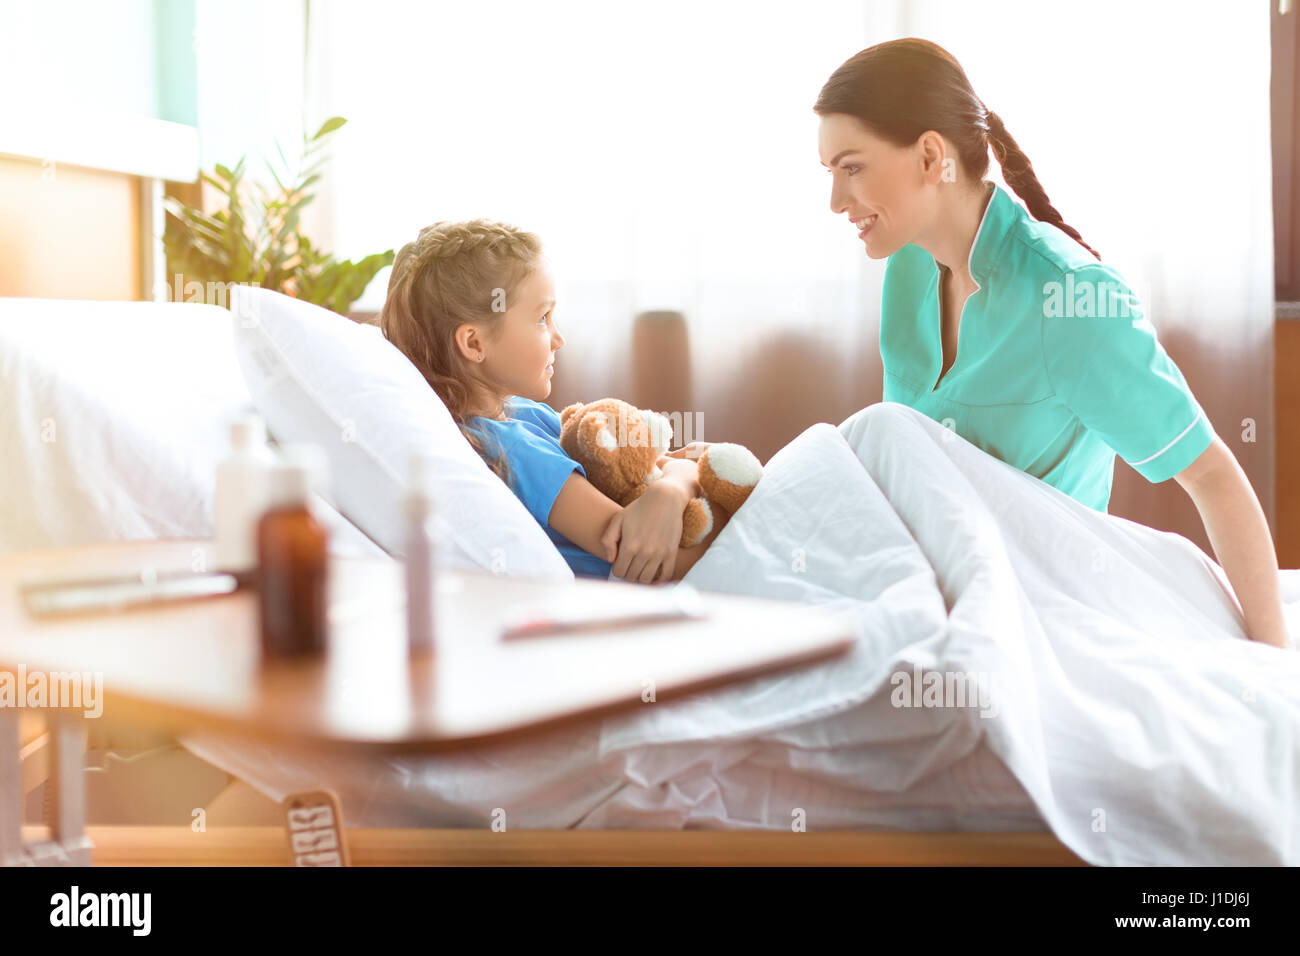 Cute little girl lying in hospital bed with teddy bear and talking with smiling nurse Stock Photo